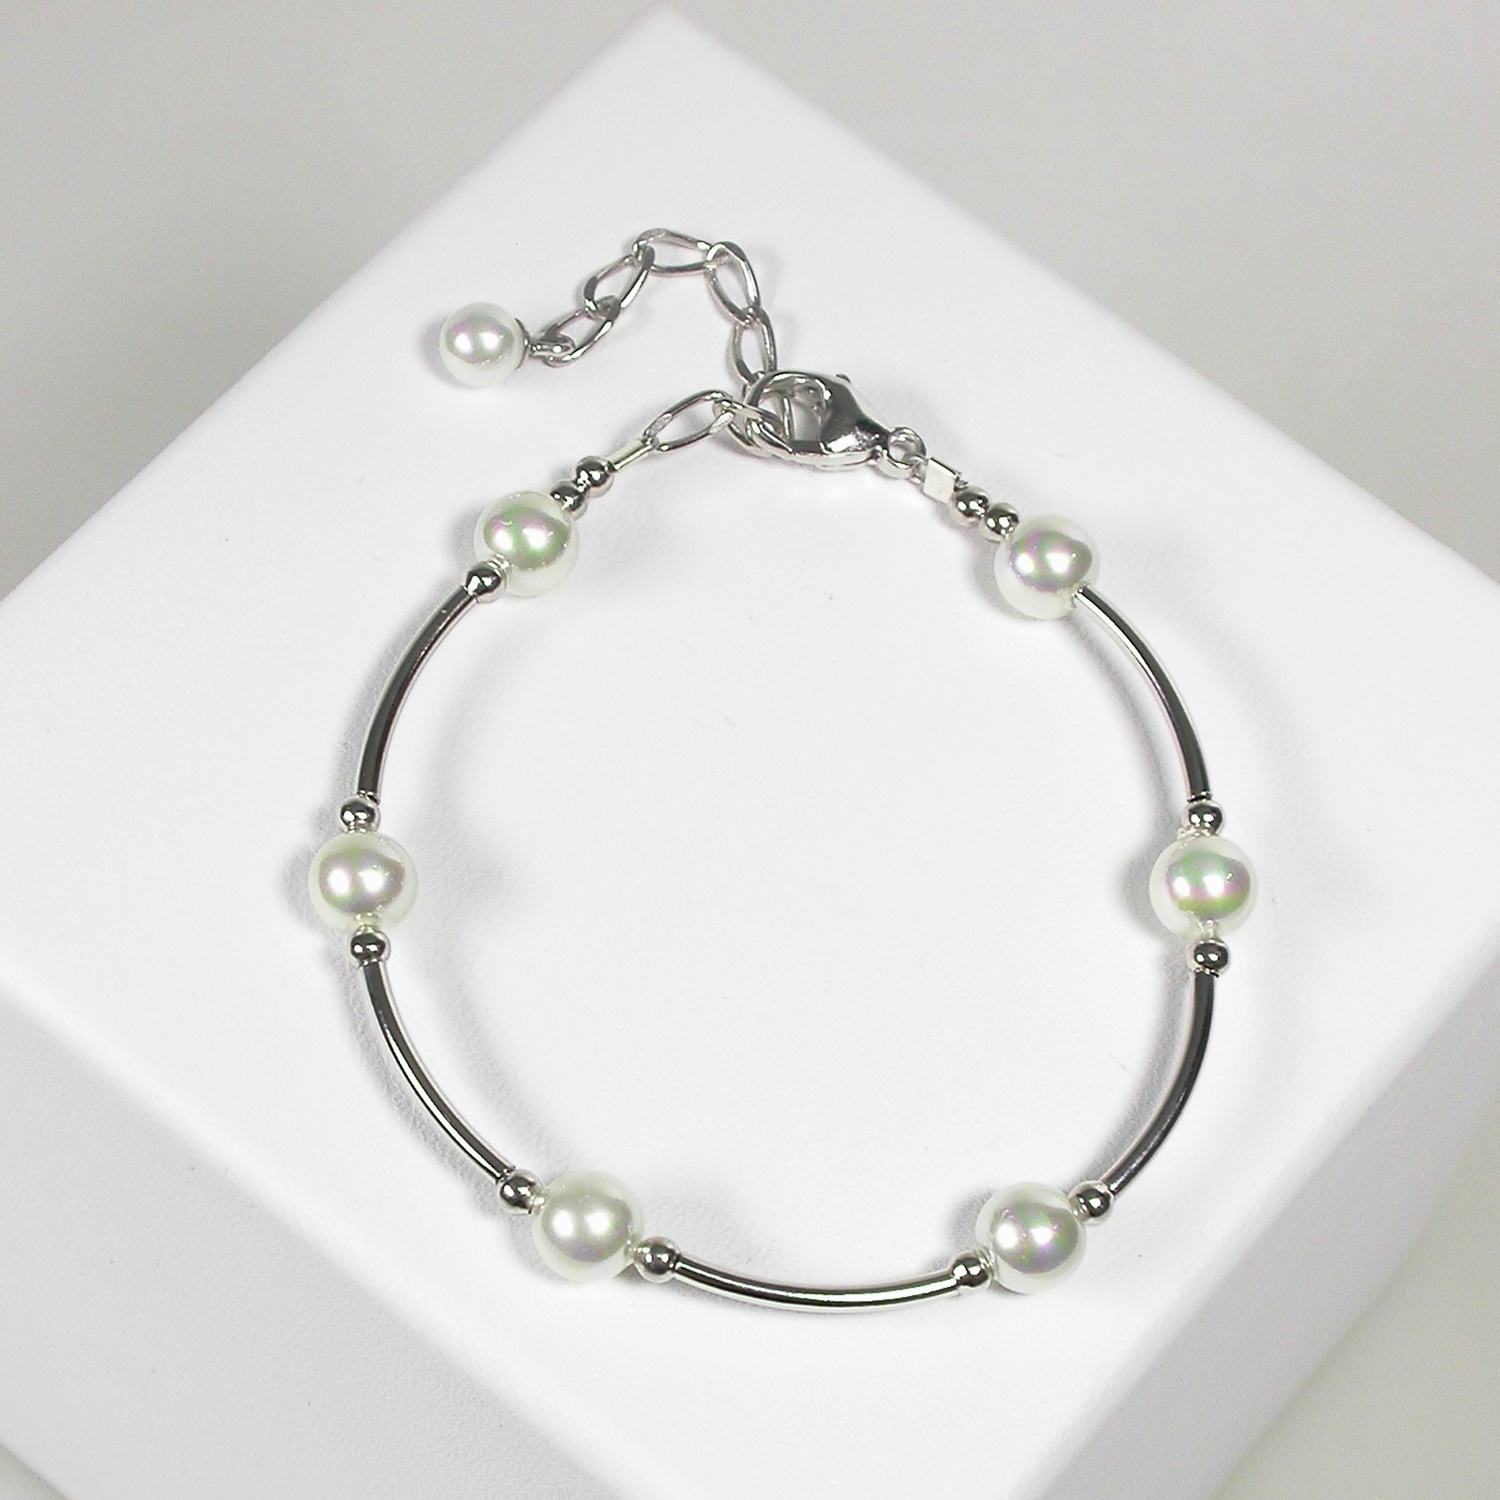 Silver Bracelet with Pearls 2